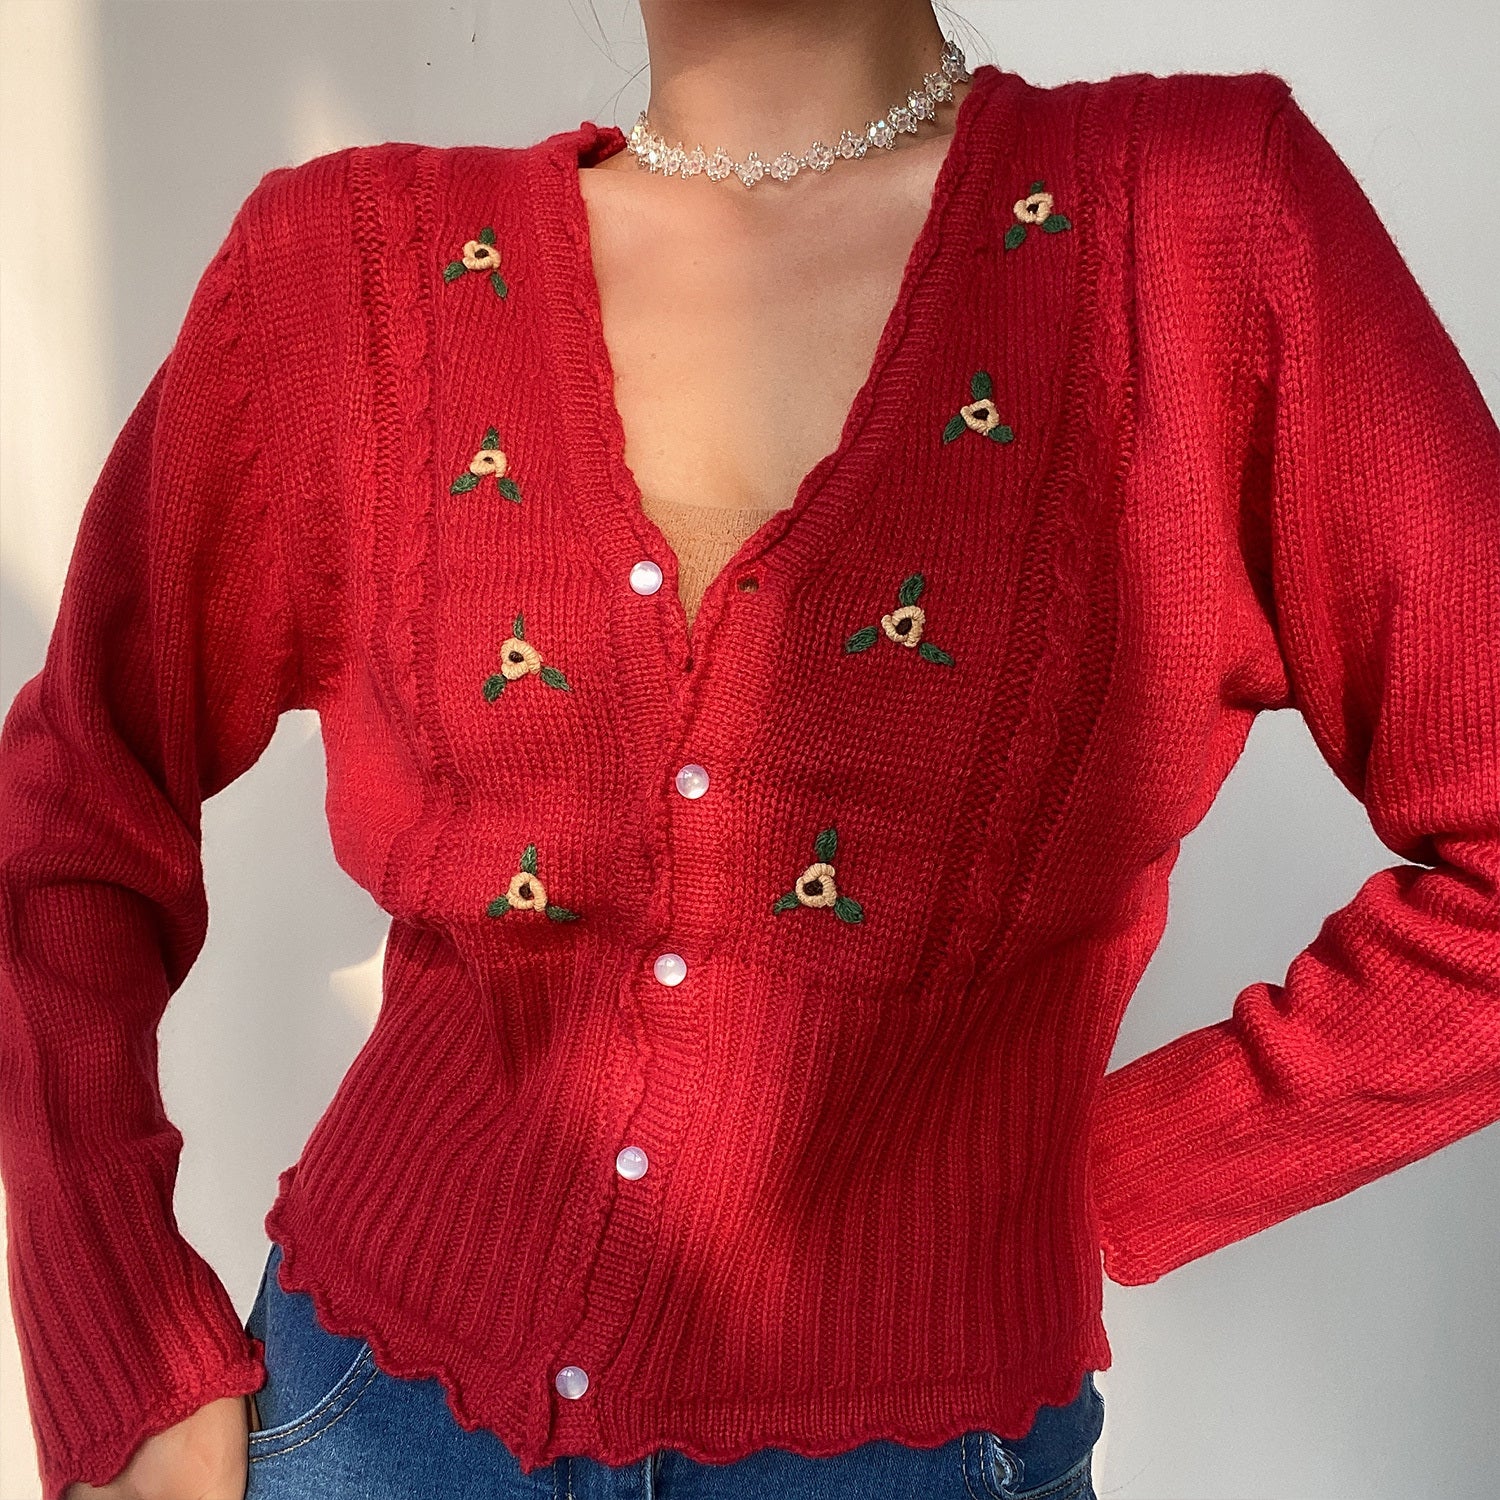 Retro French V-neck Cute Wooden Ears Crochet-breasted Slim Long Sleeve Knit Cardigan Top